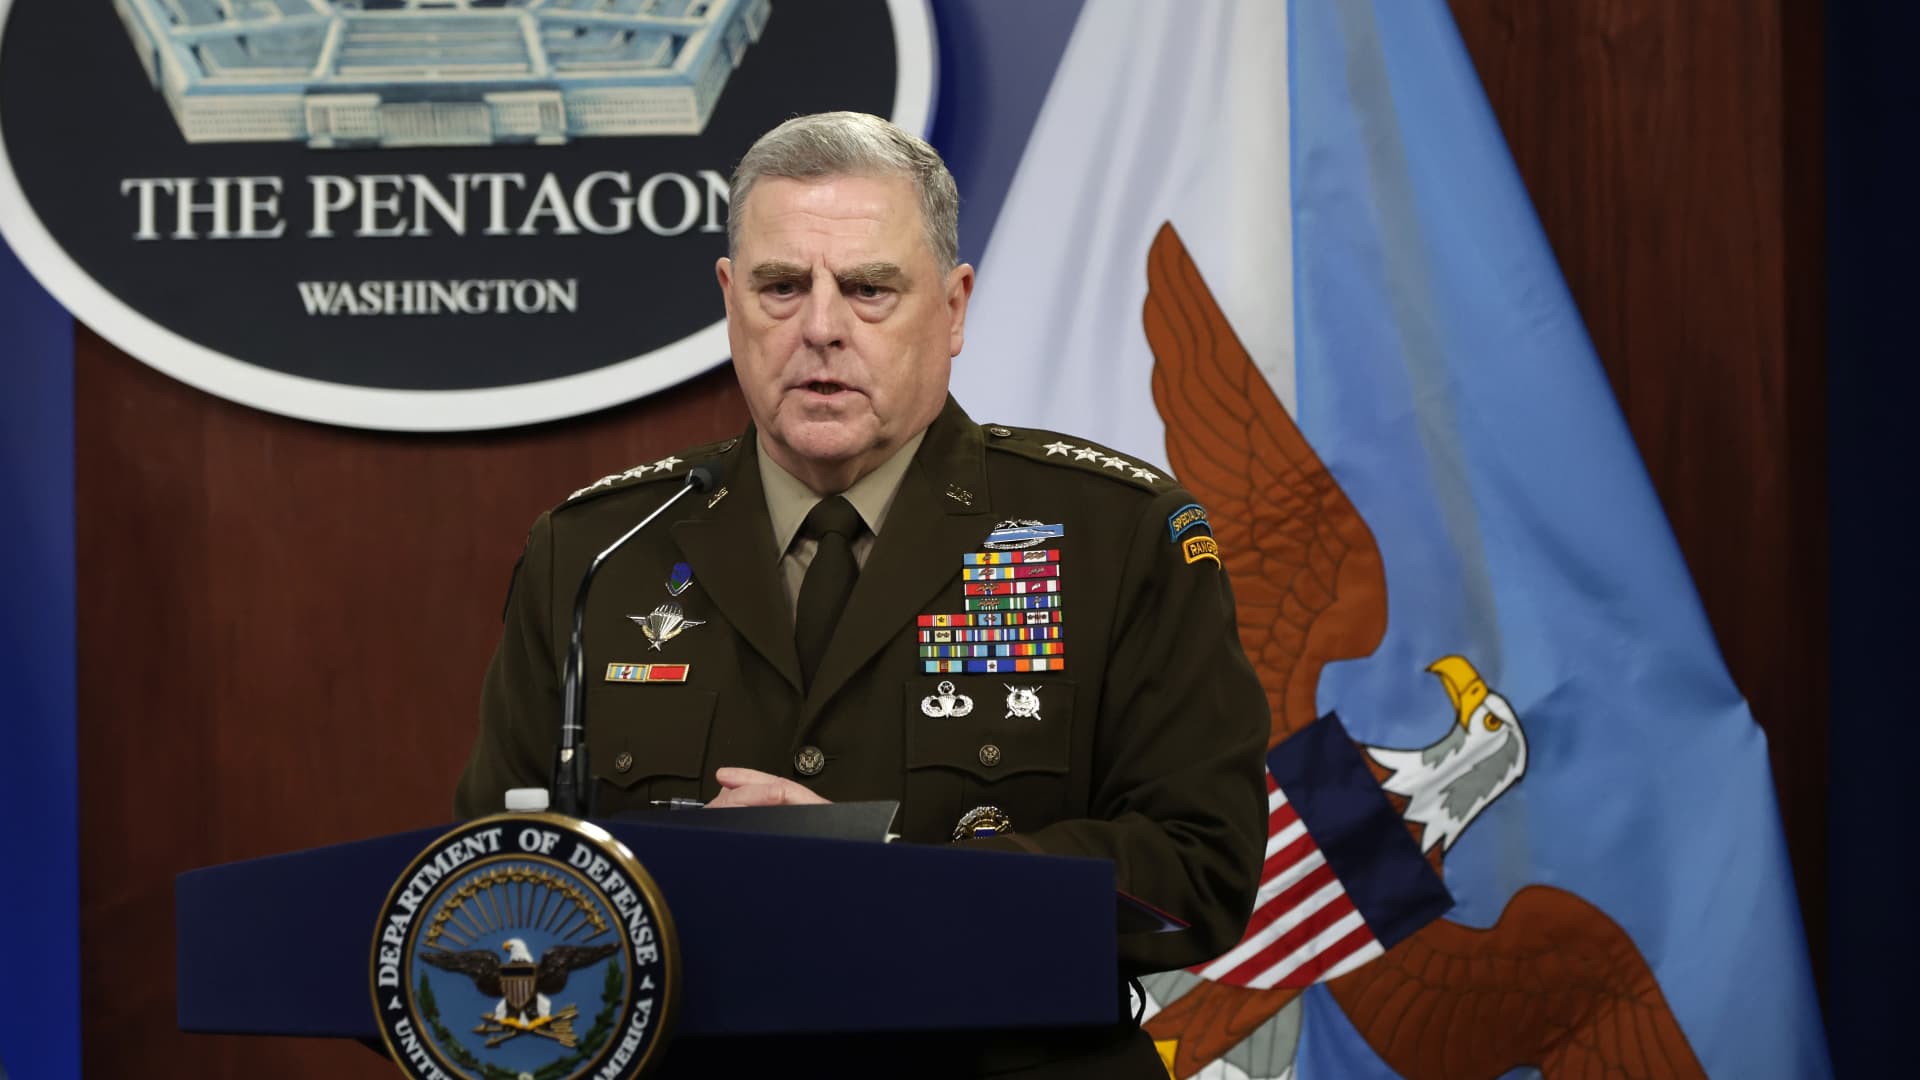 Chairman of the Joint Chiefs of Staff General Mark Milley participates in a news briefing at the Pentagon May 23, 2022 in Arlington, Virginia.